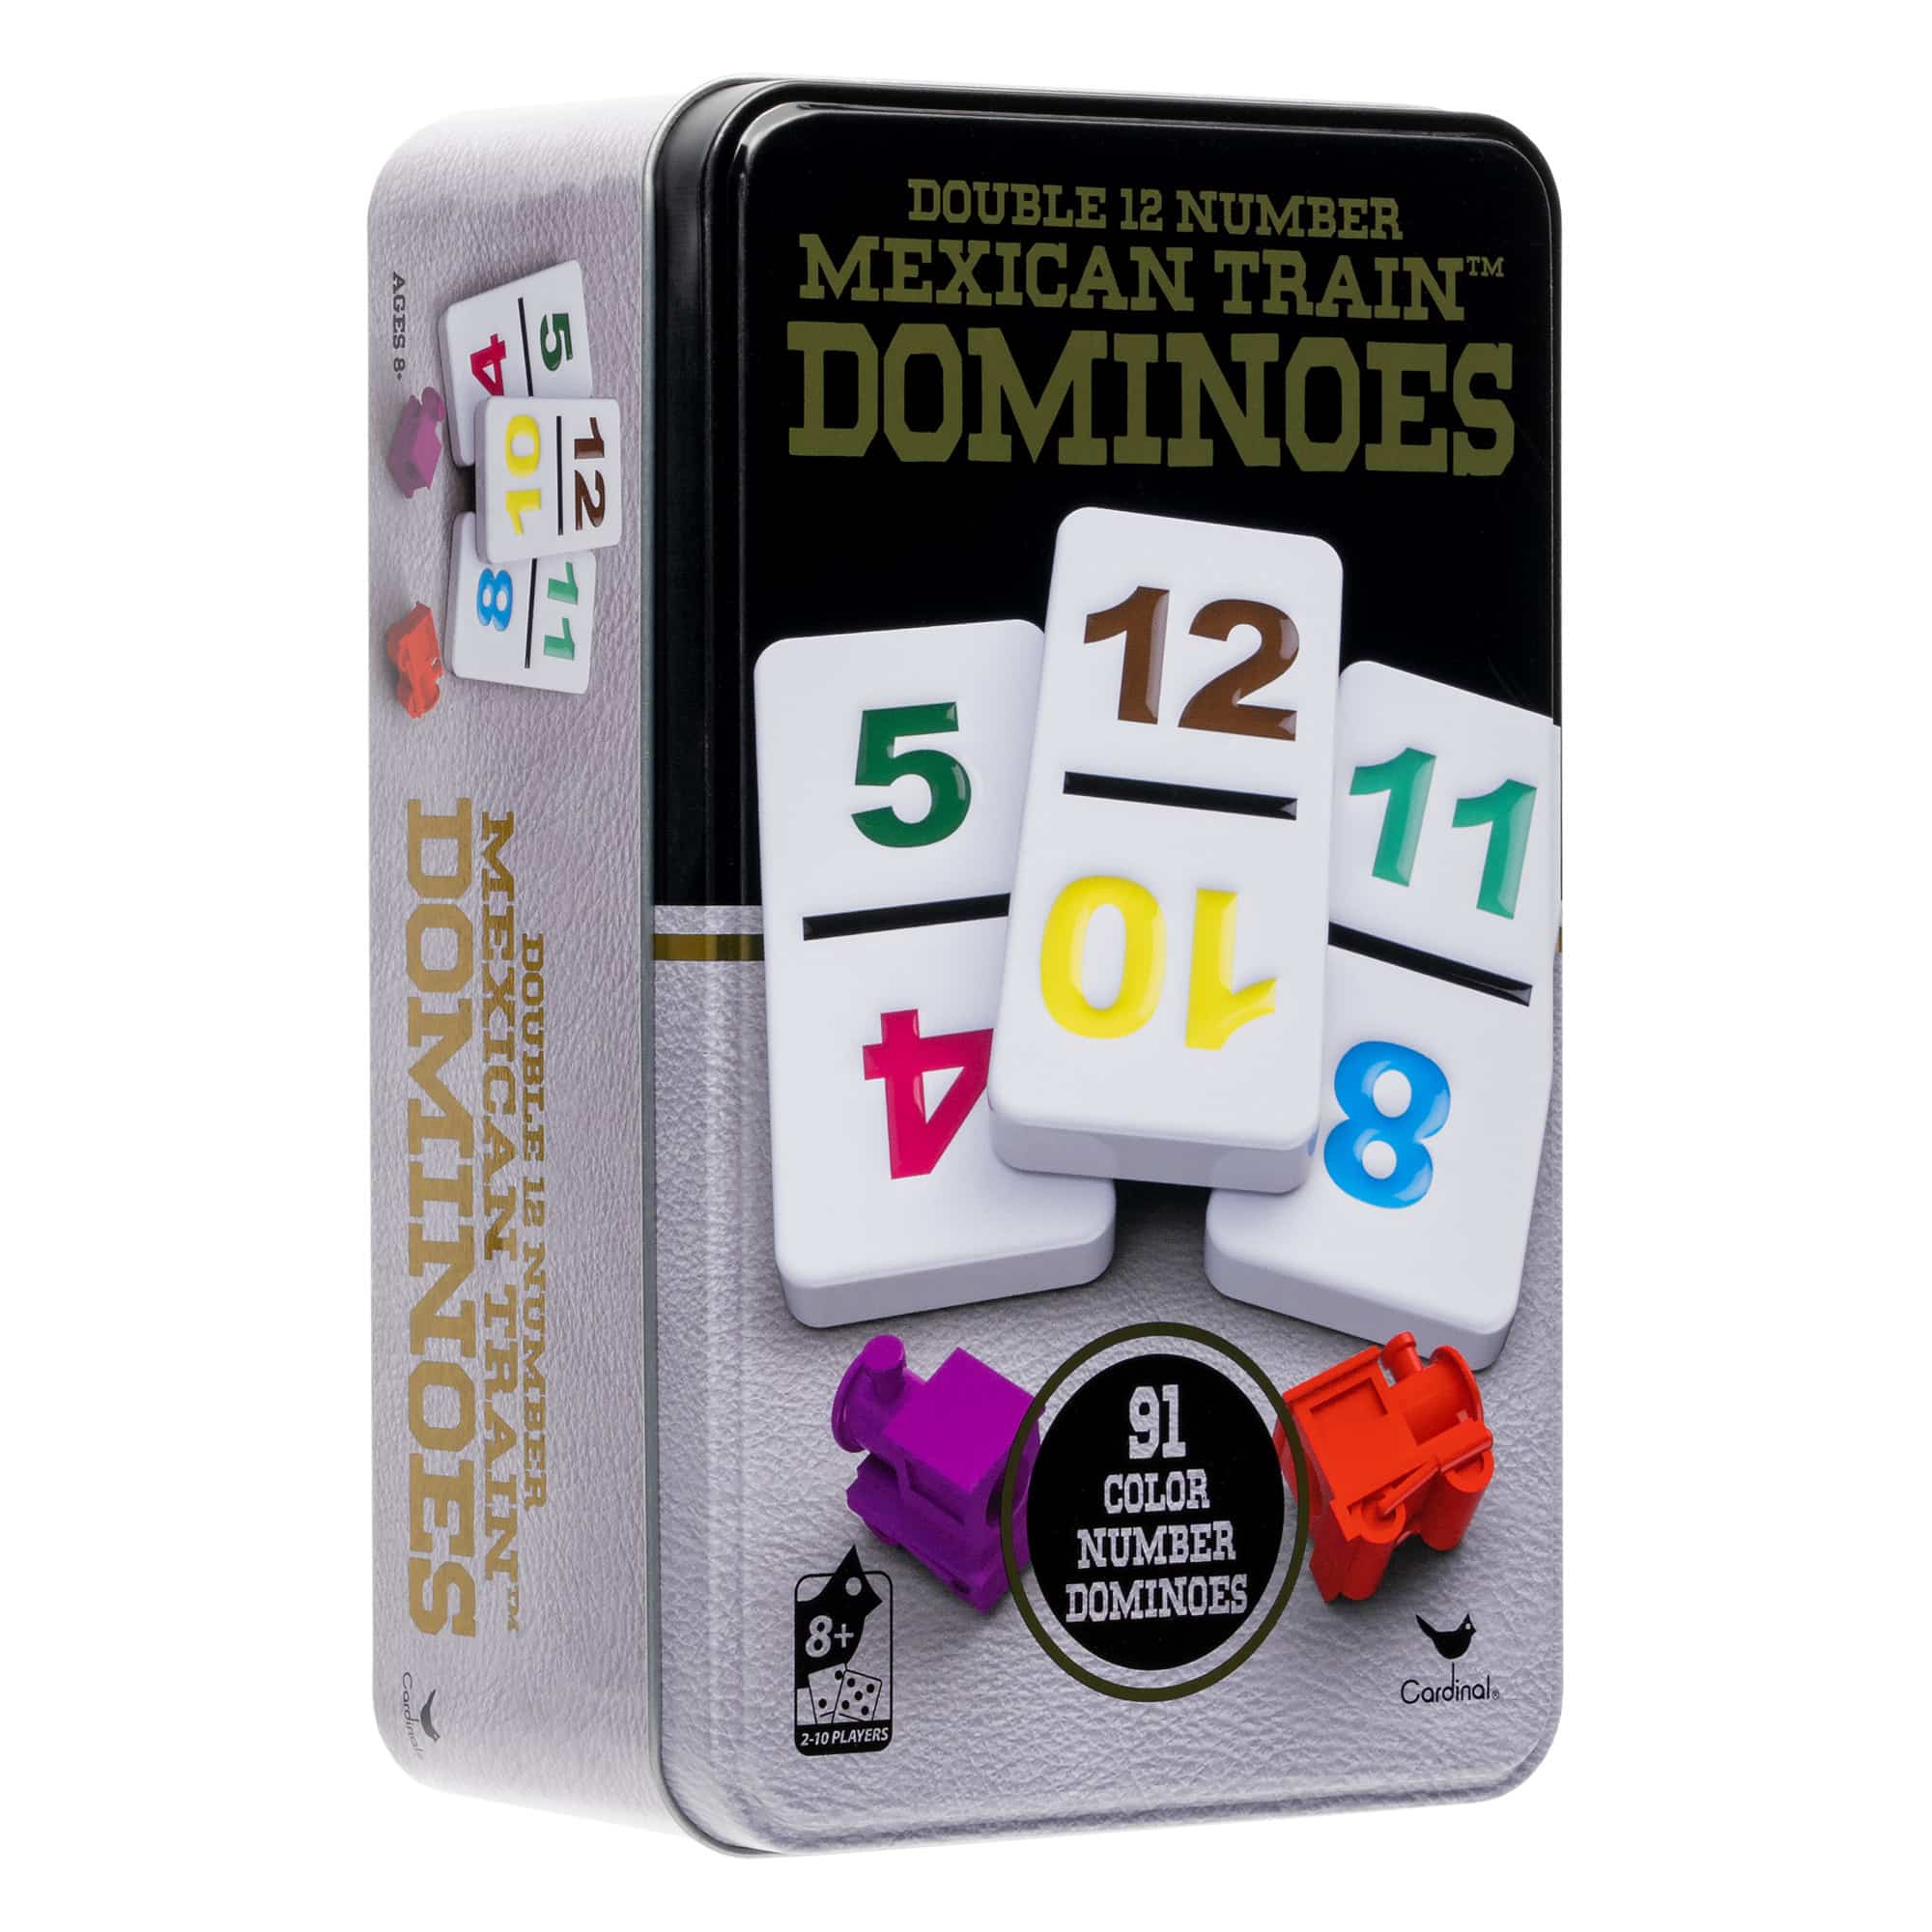 Cardinal - Double Twelve Mexican Train Dominoes In Tin